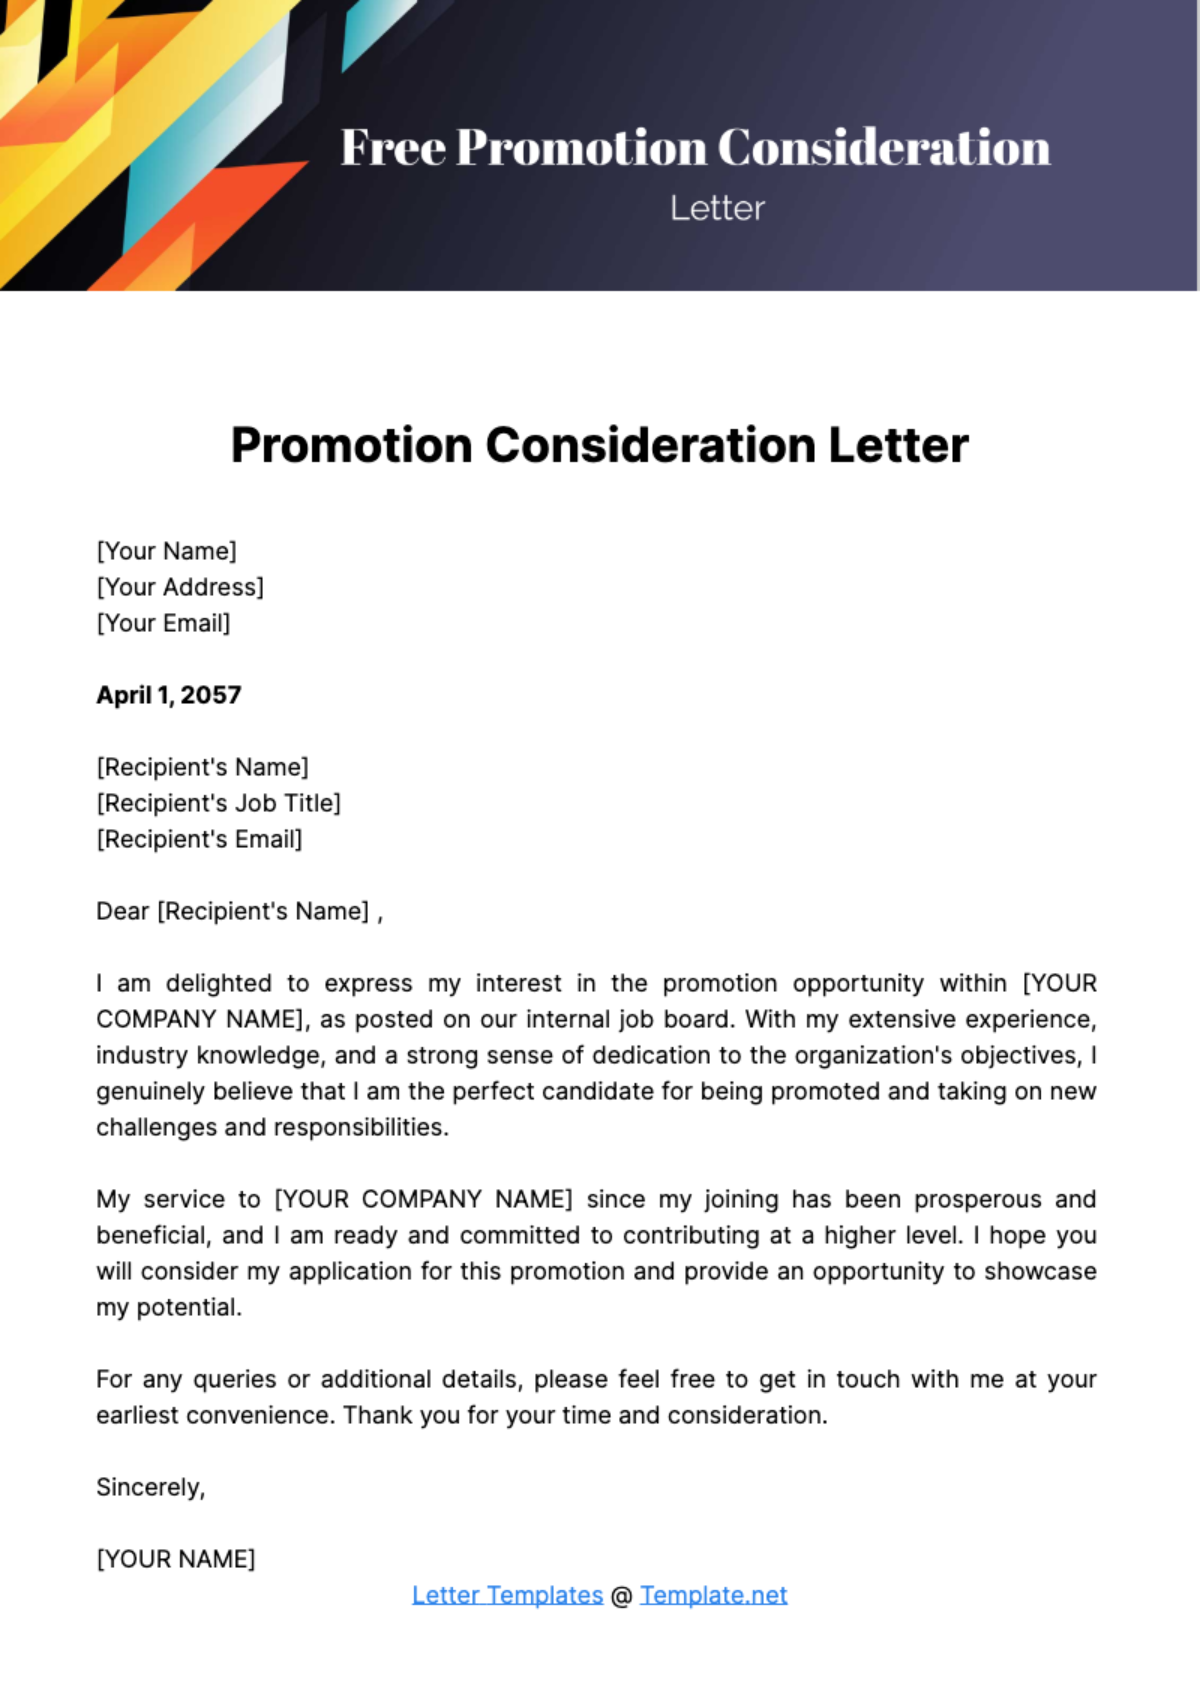 Promotion Consideration Letter Template